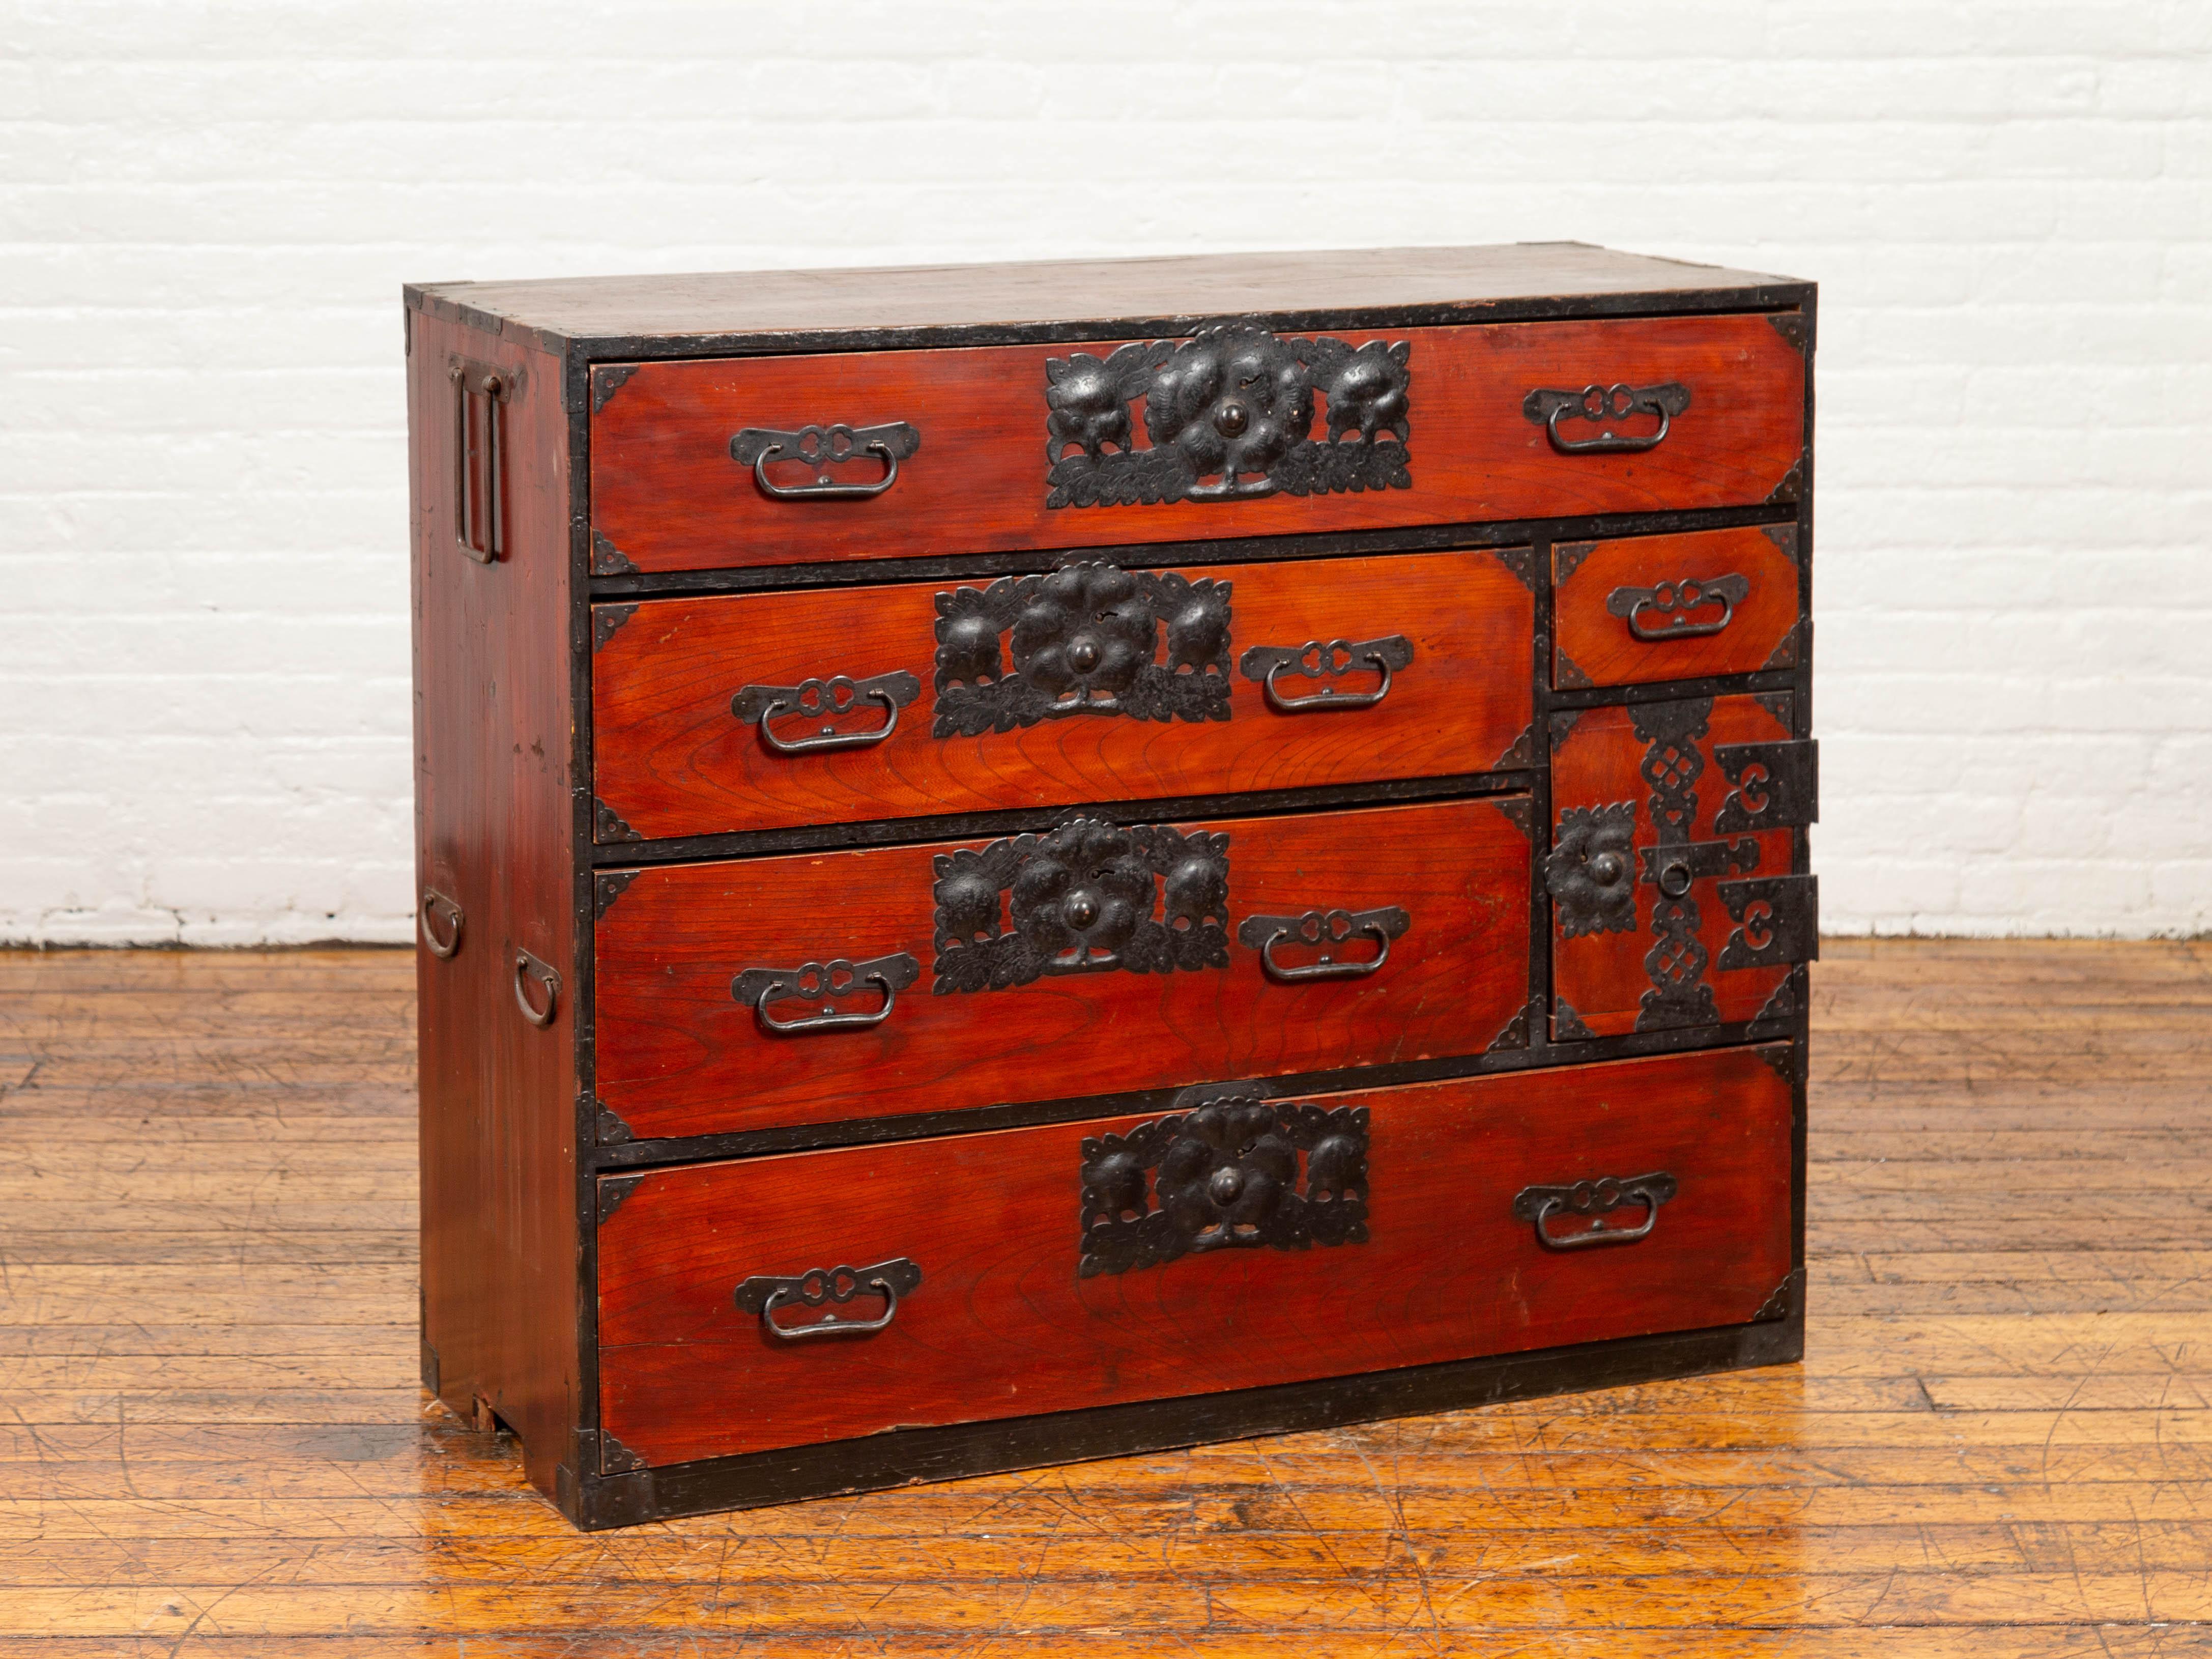 Lacquered Japanese 19th Century Meiji Period Sendai Clothing Tansu with Bronze Hardware